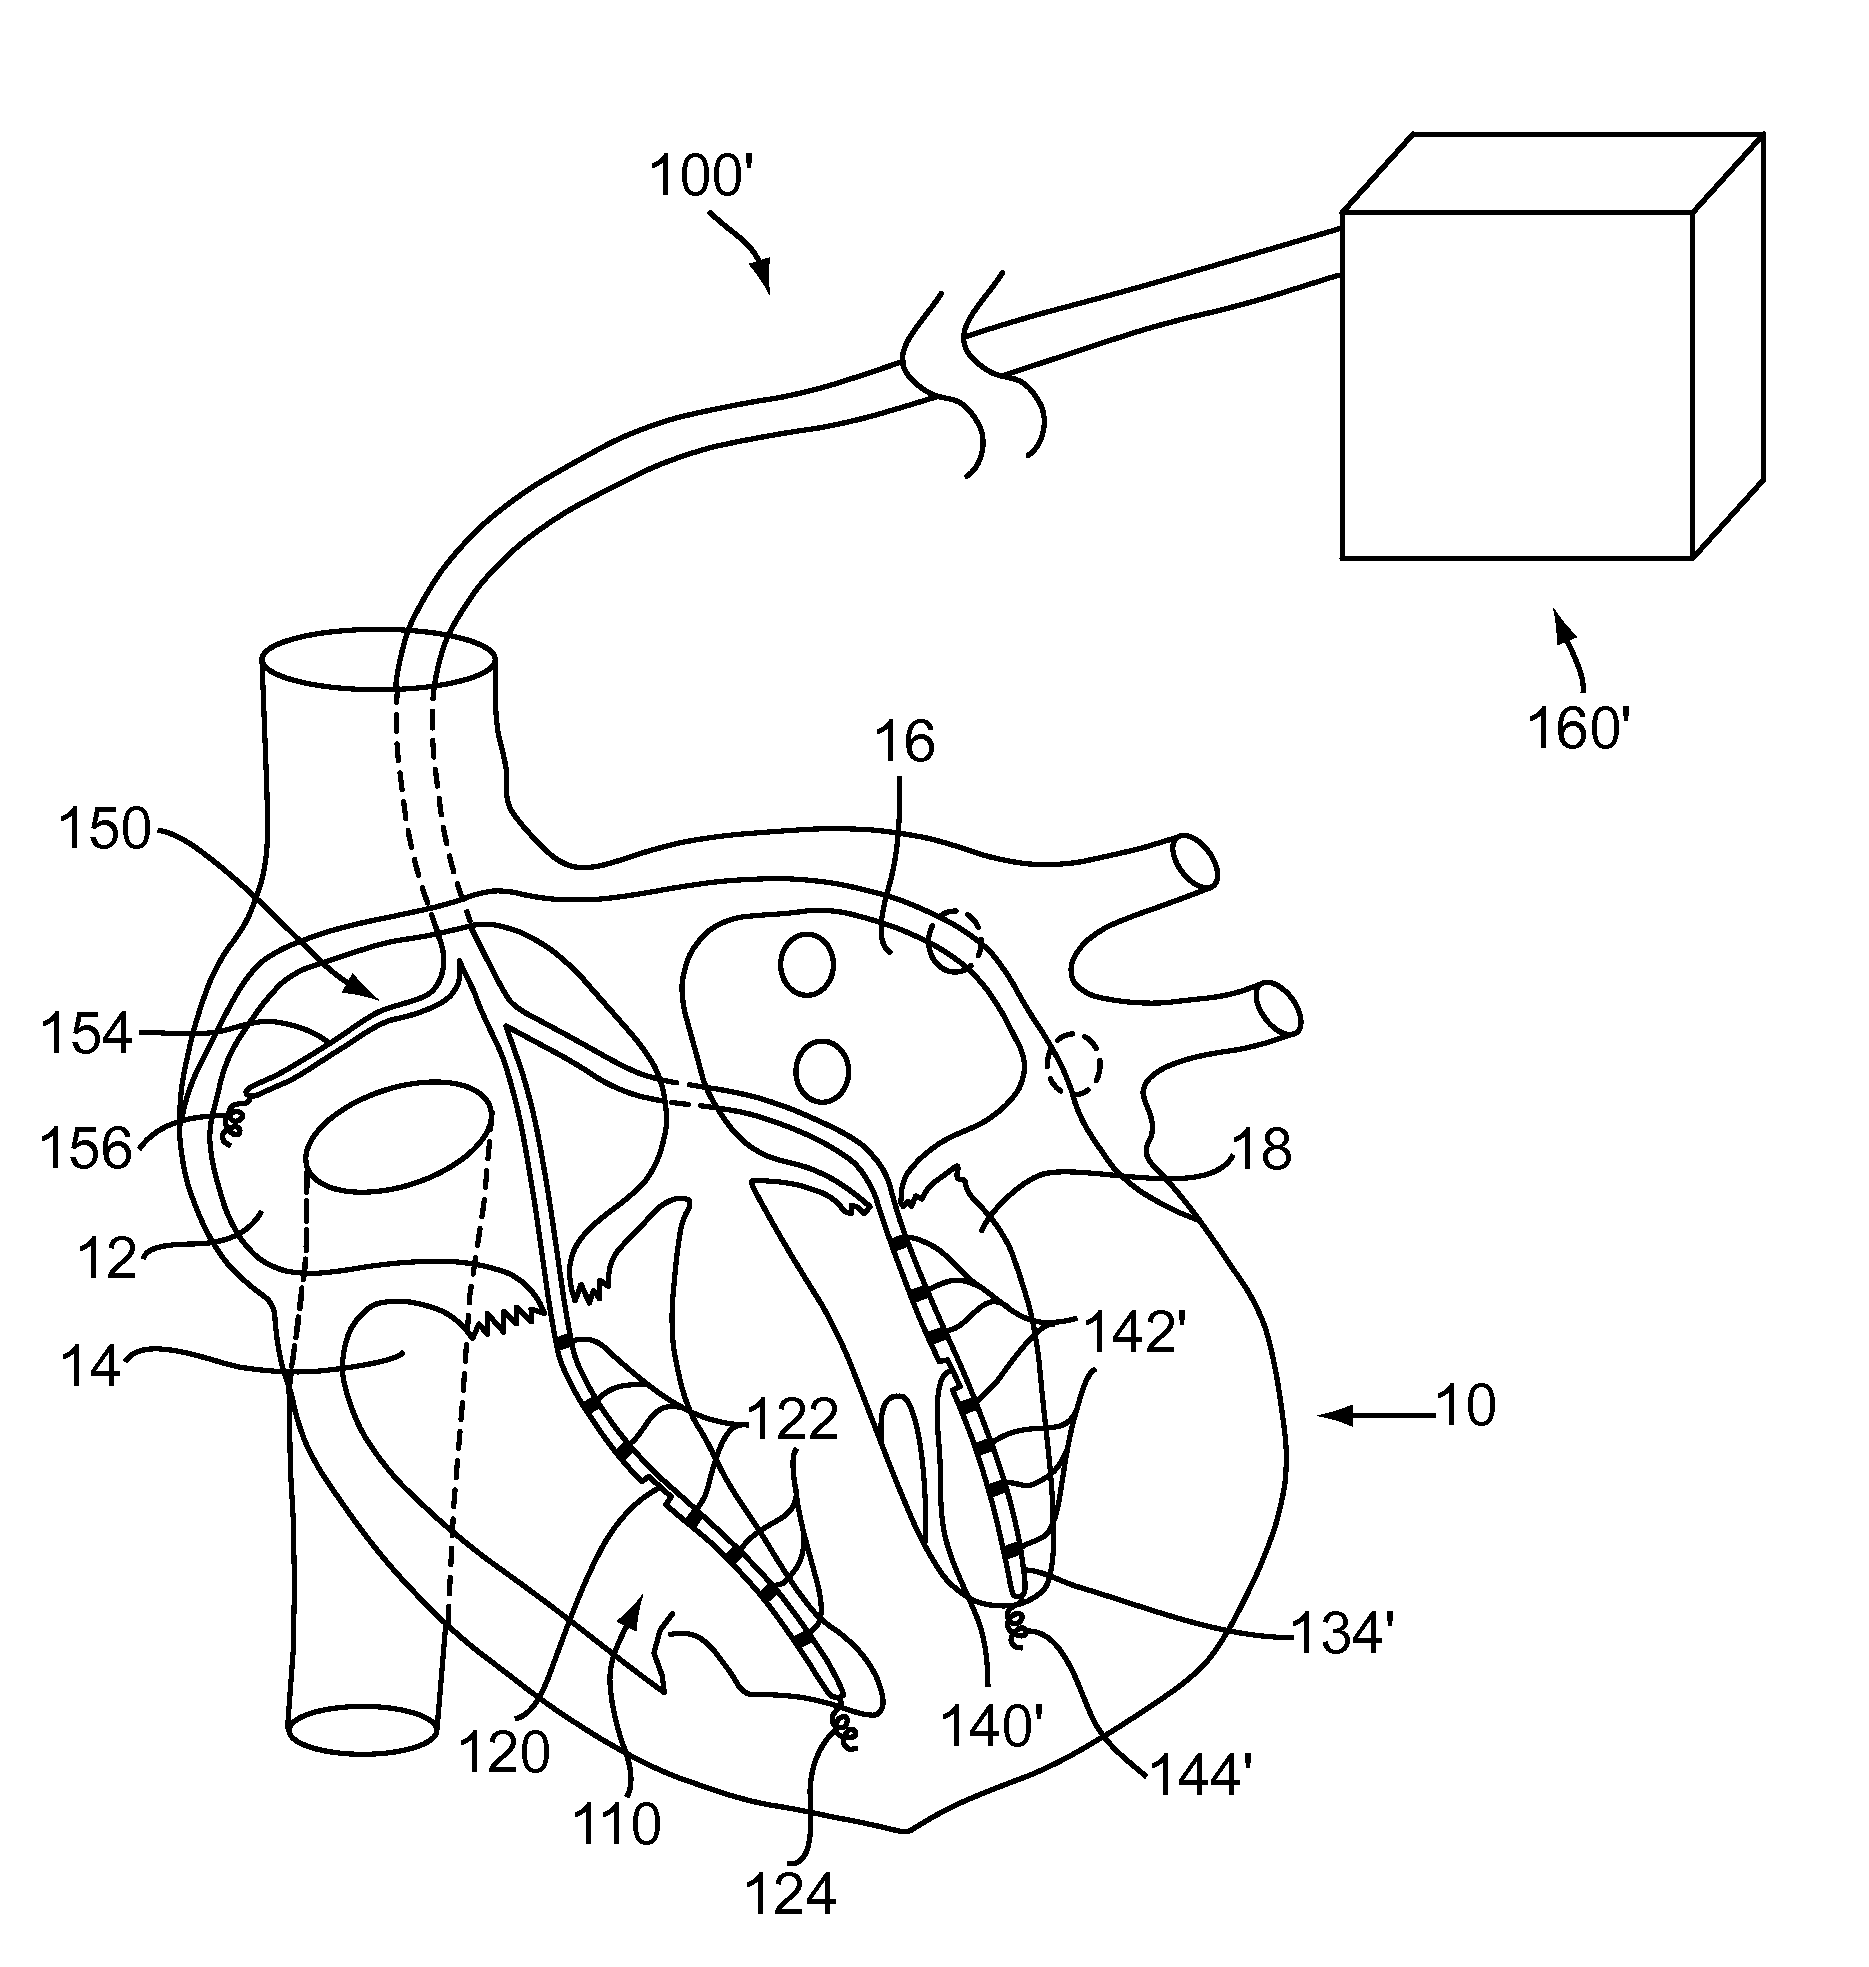 Cardiac pacemakers and systems and methods for using them